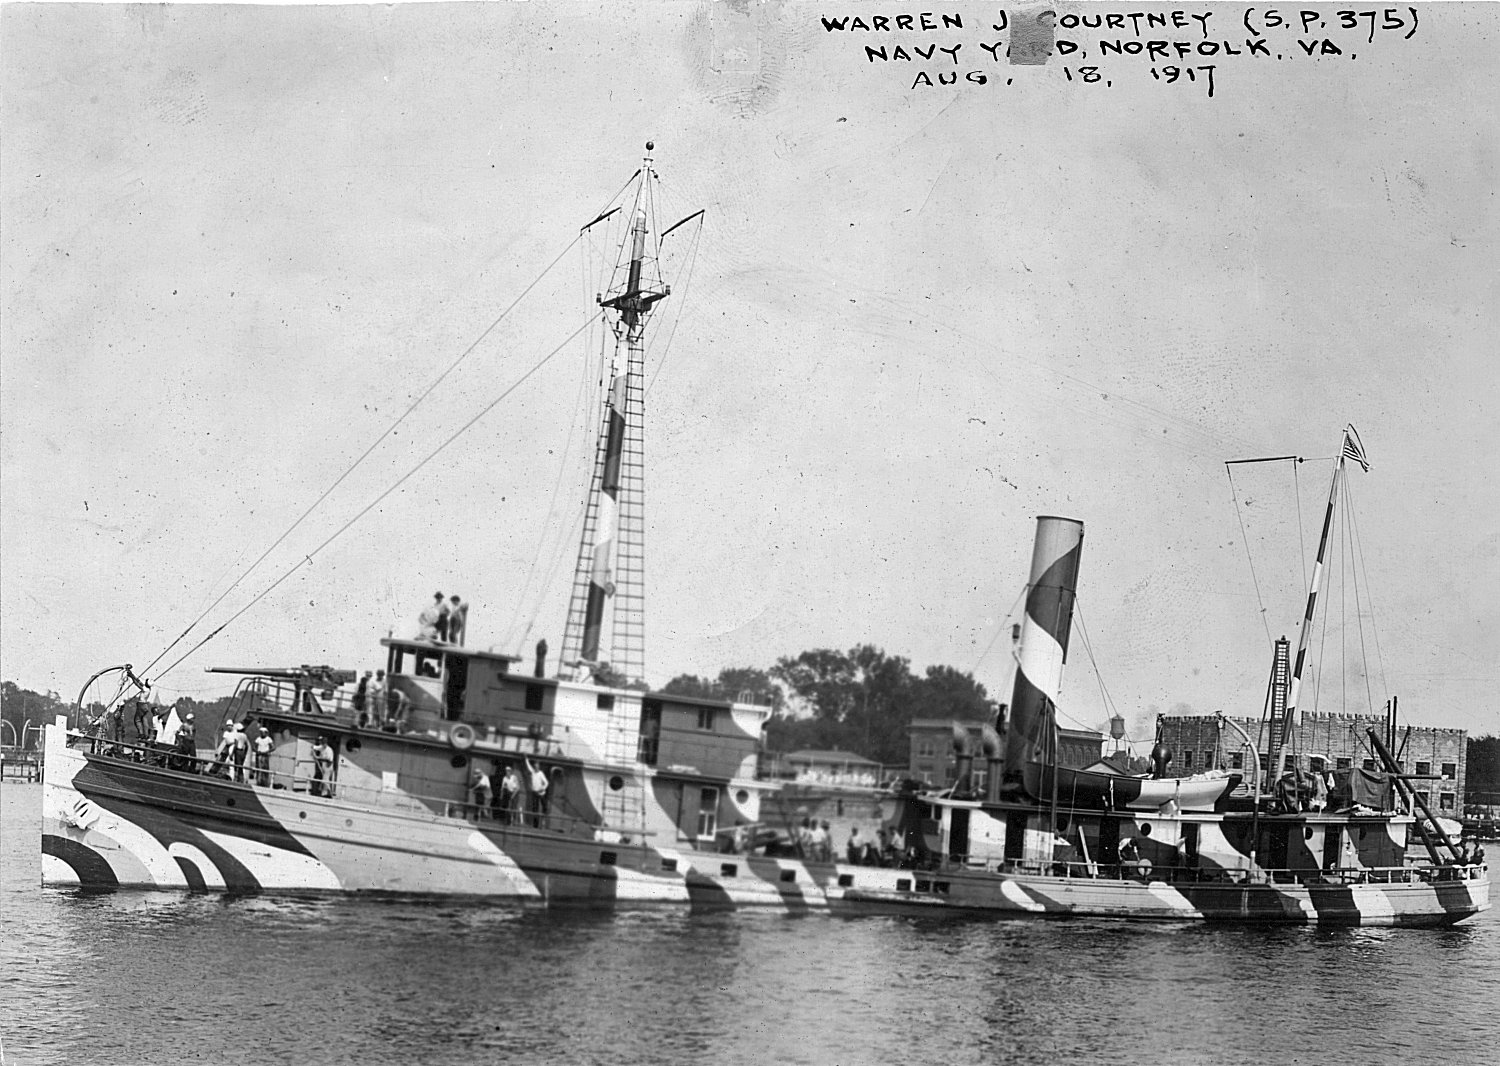 A 1917 photograph of the USS Courtney on the Elizabeth River at Norfolk, Virginia, sporting a new “Dazzle” paint scheme for wartime service. Like other converted fishing vessels, Courtney had poor sea-keeping qualities. (Courtesy of Navsource.org)